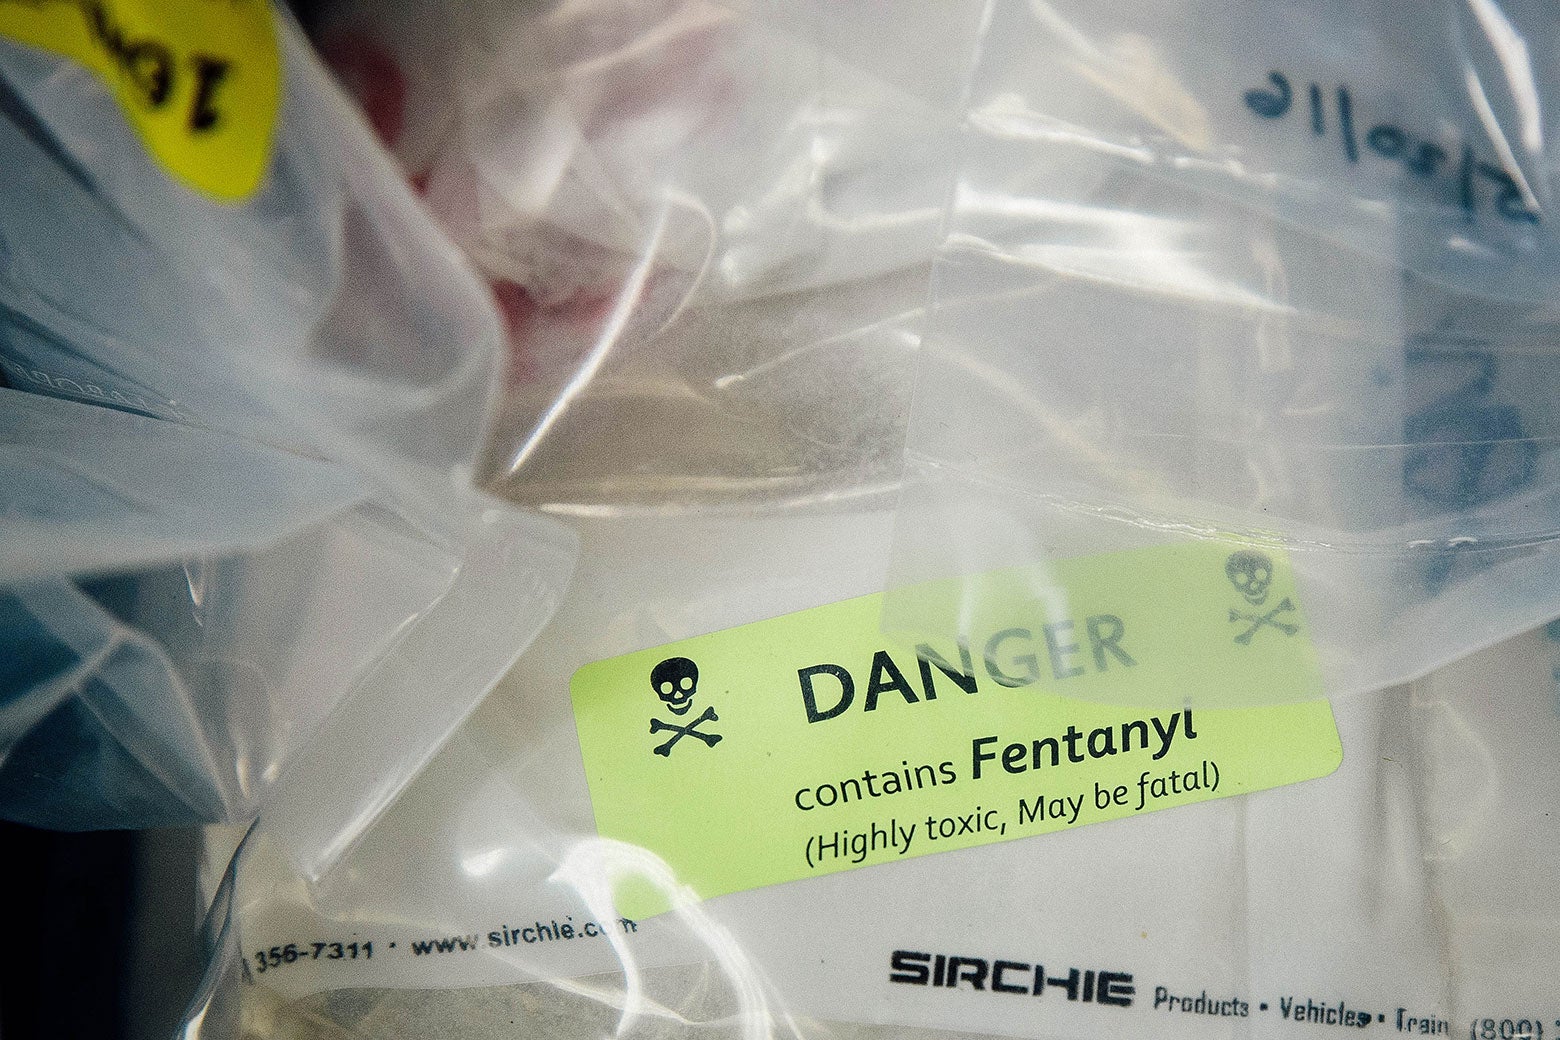 Bags of heroin, some laced with fentanyl, are displayed before a press conference at the office of the New York Attorney General on Sept. 23, 2016.